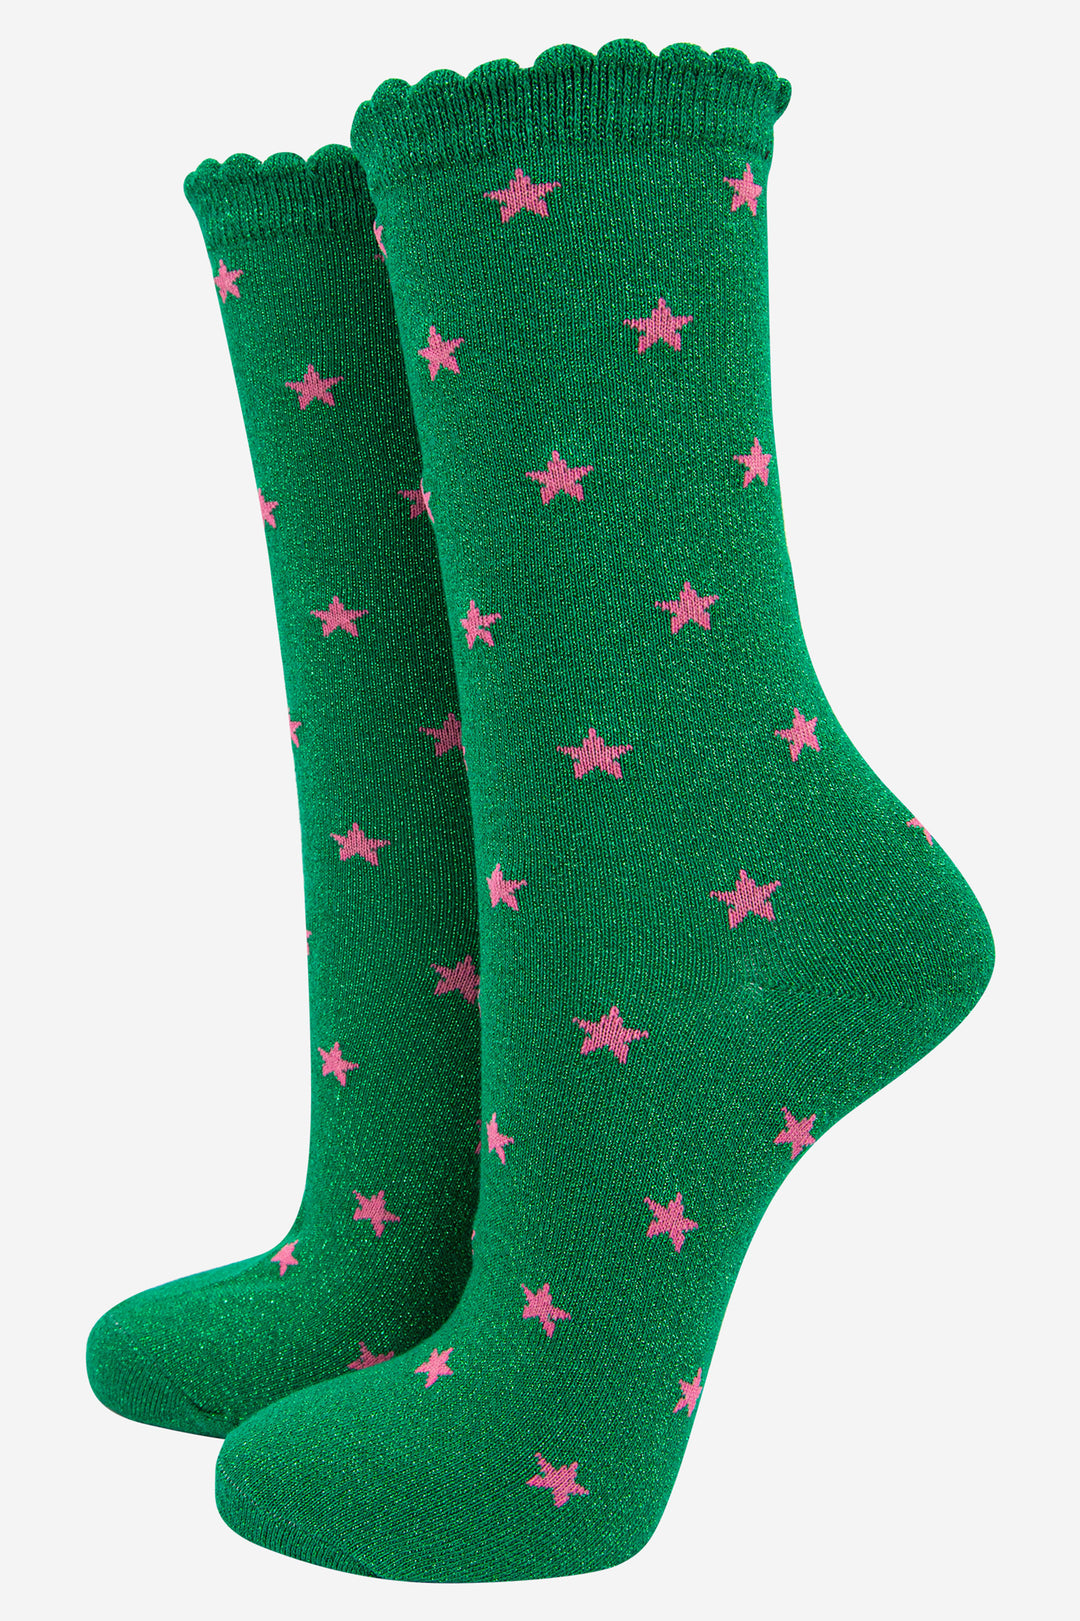 green glitter ankle socks with an all over pink star pattern and scalloped cuffs